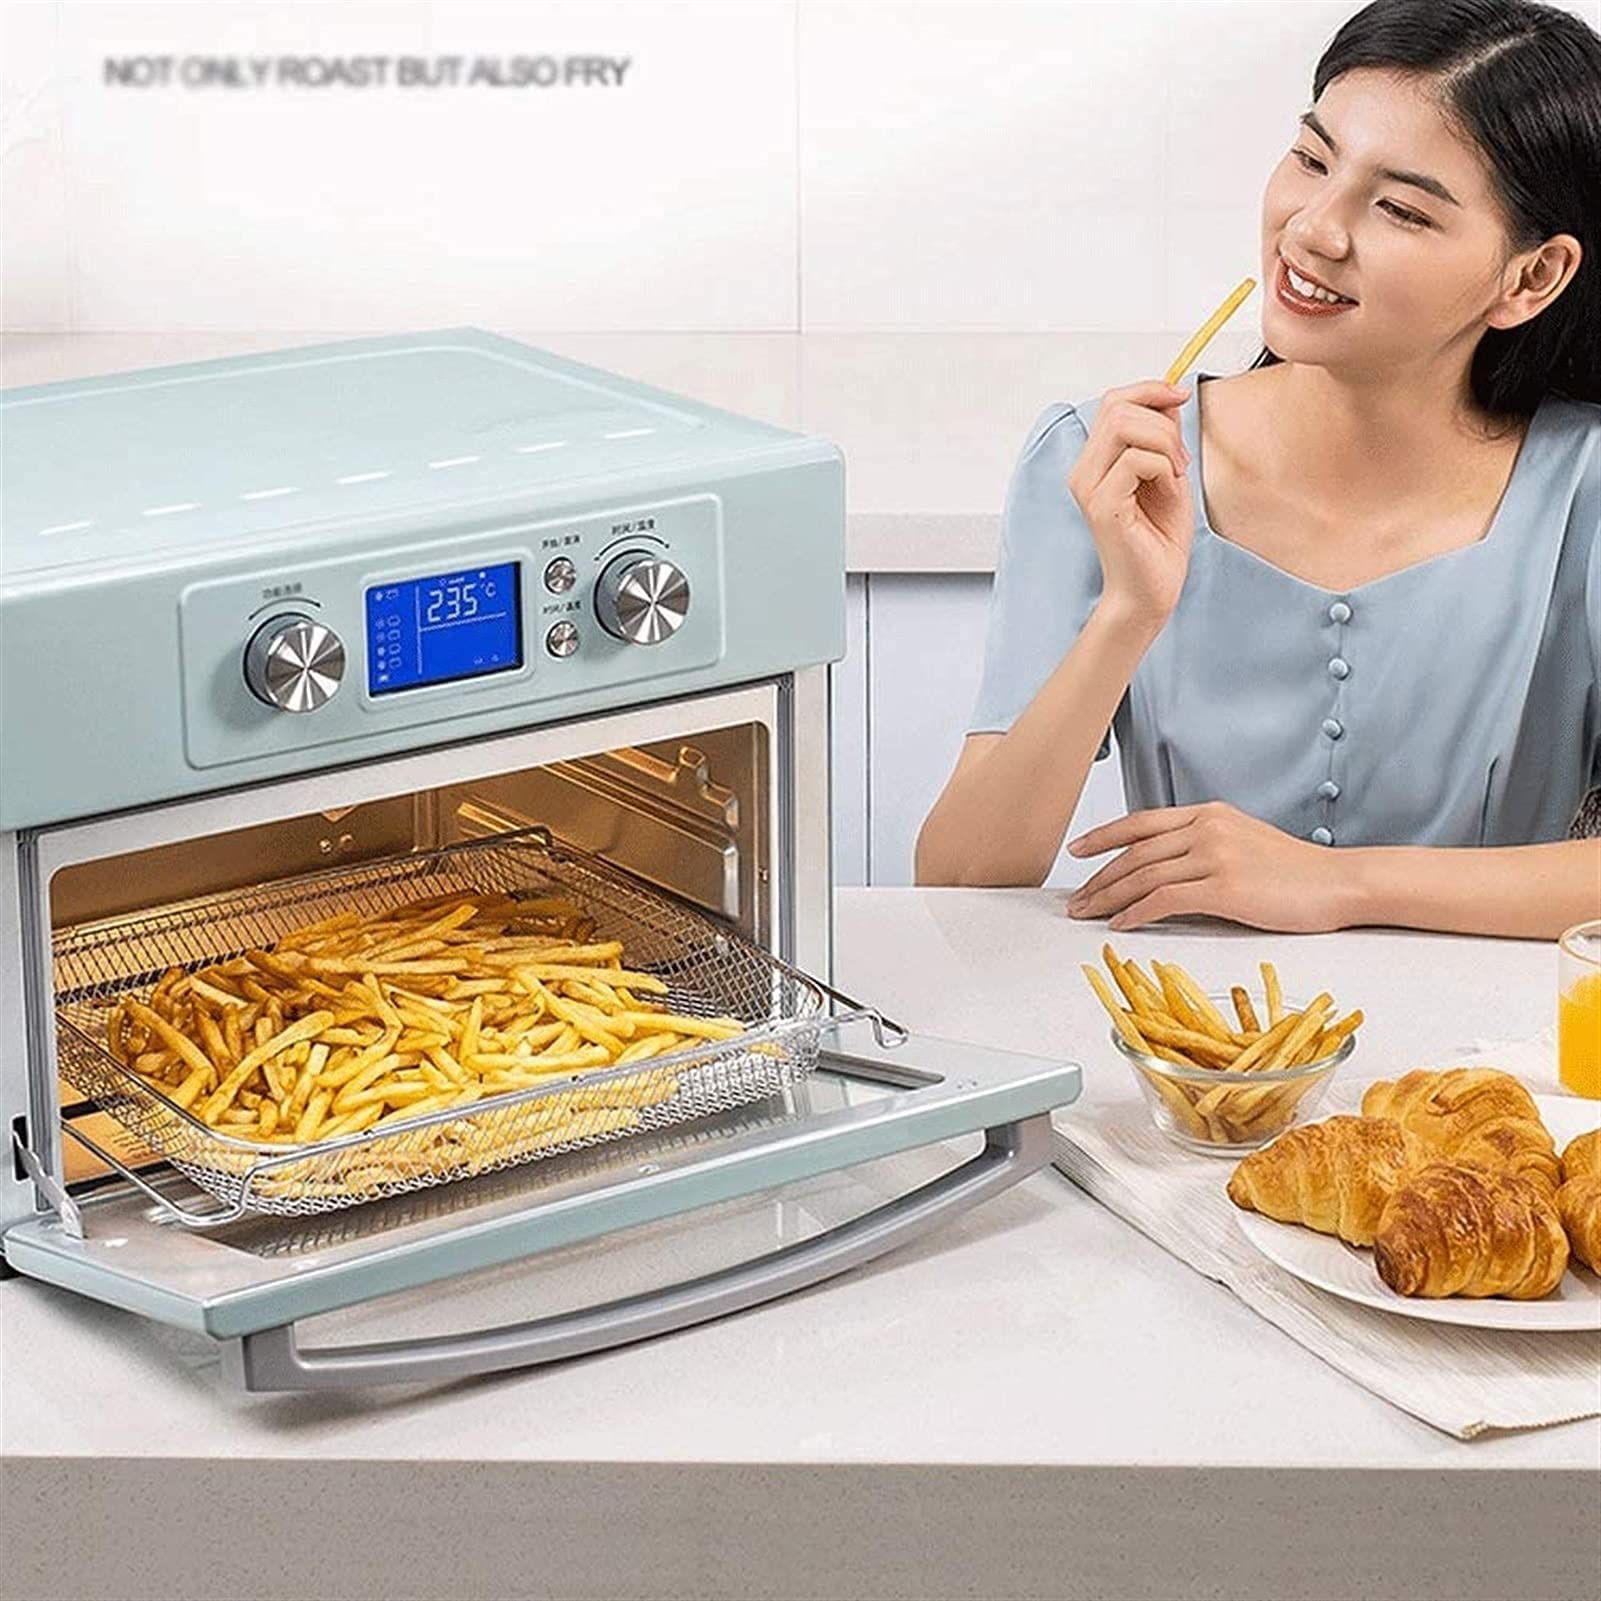 Farberware Air Fryer Toaster Oven, Stainless Steel, Countertop for